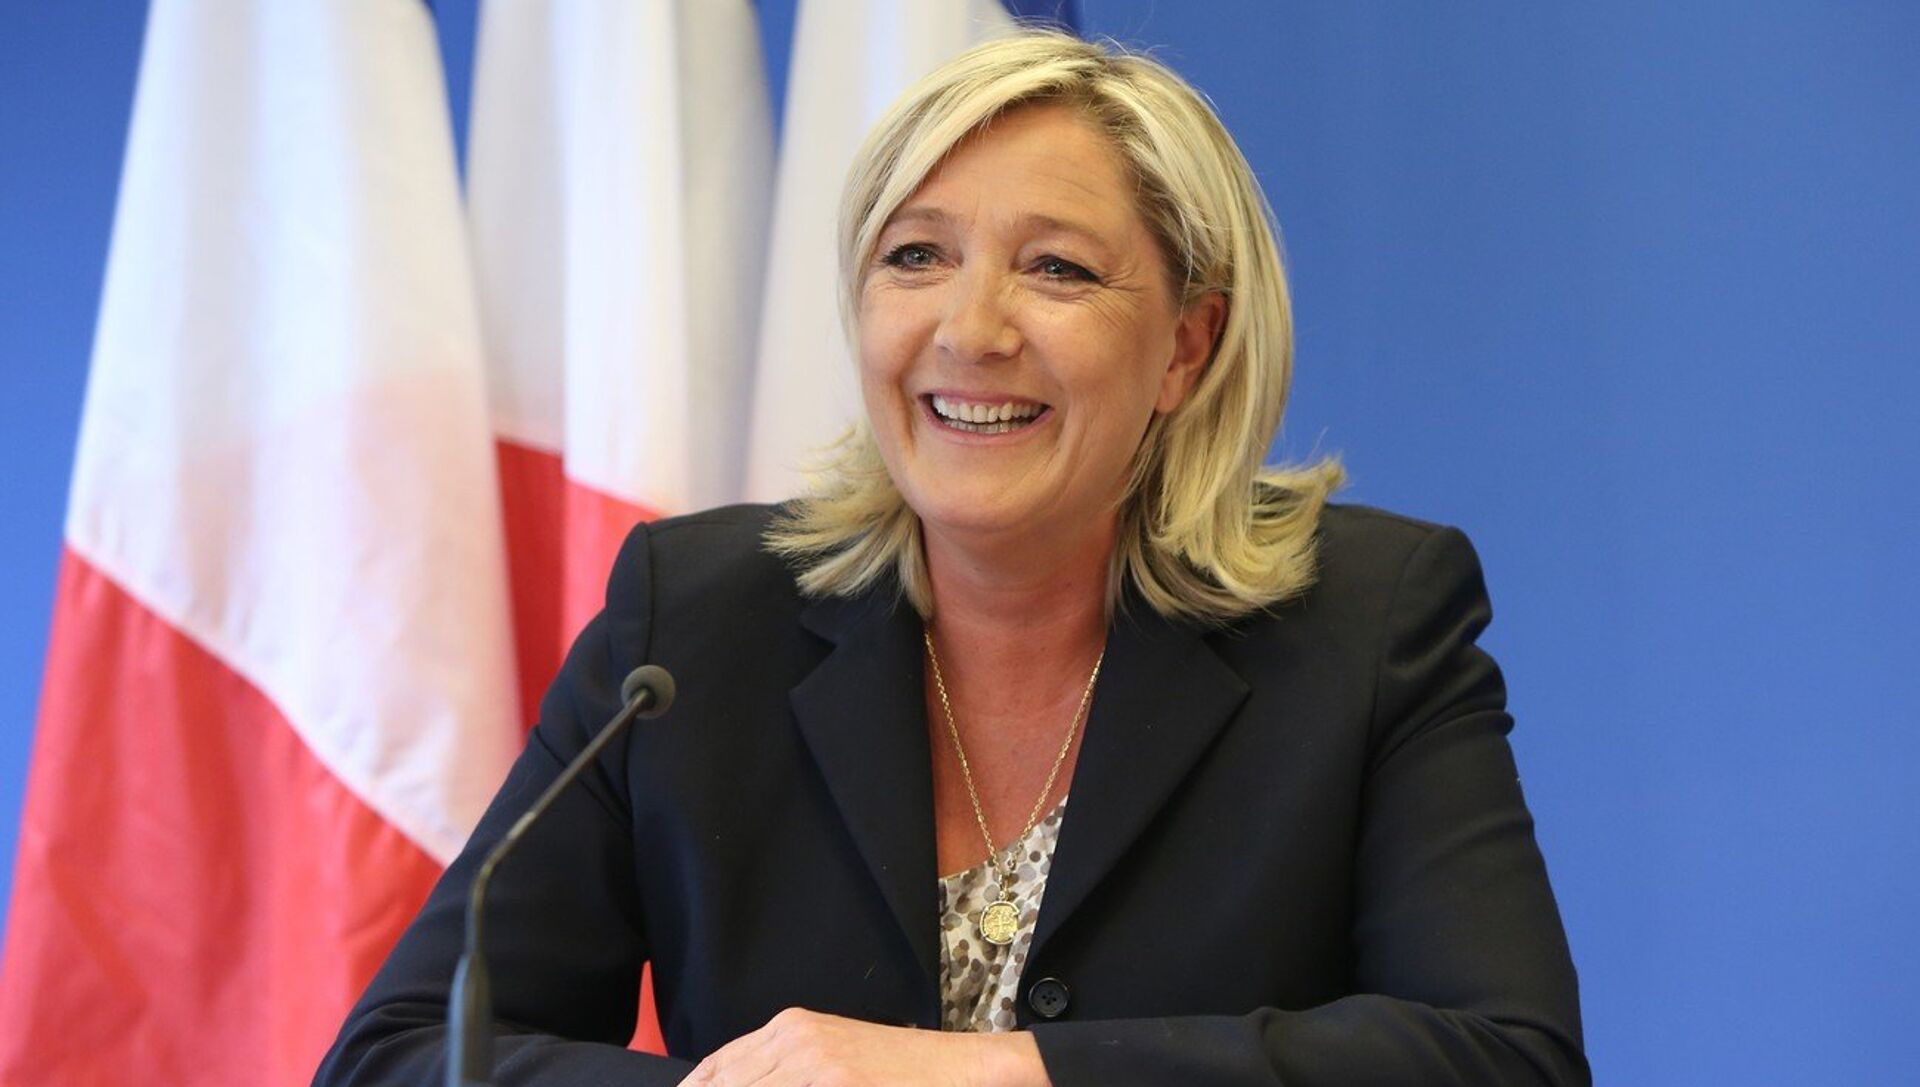 PRESS CONFERENCE GIVEN BY MARINE LE PEN AT THE 'FRONT NATIONAL' HEADQUARTERs. - Sputnik Moldova-România, 1920, 27.02.2021